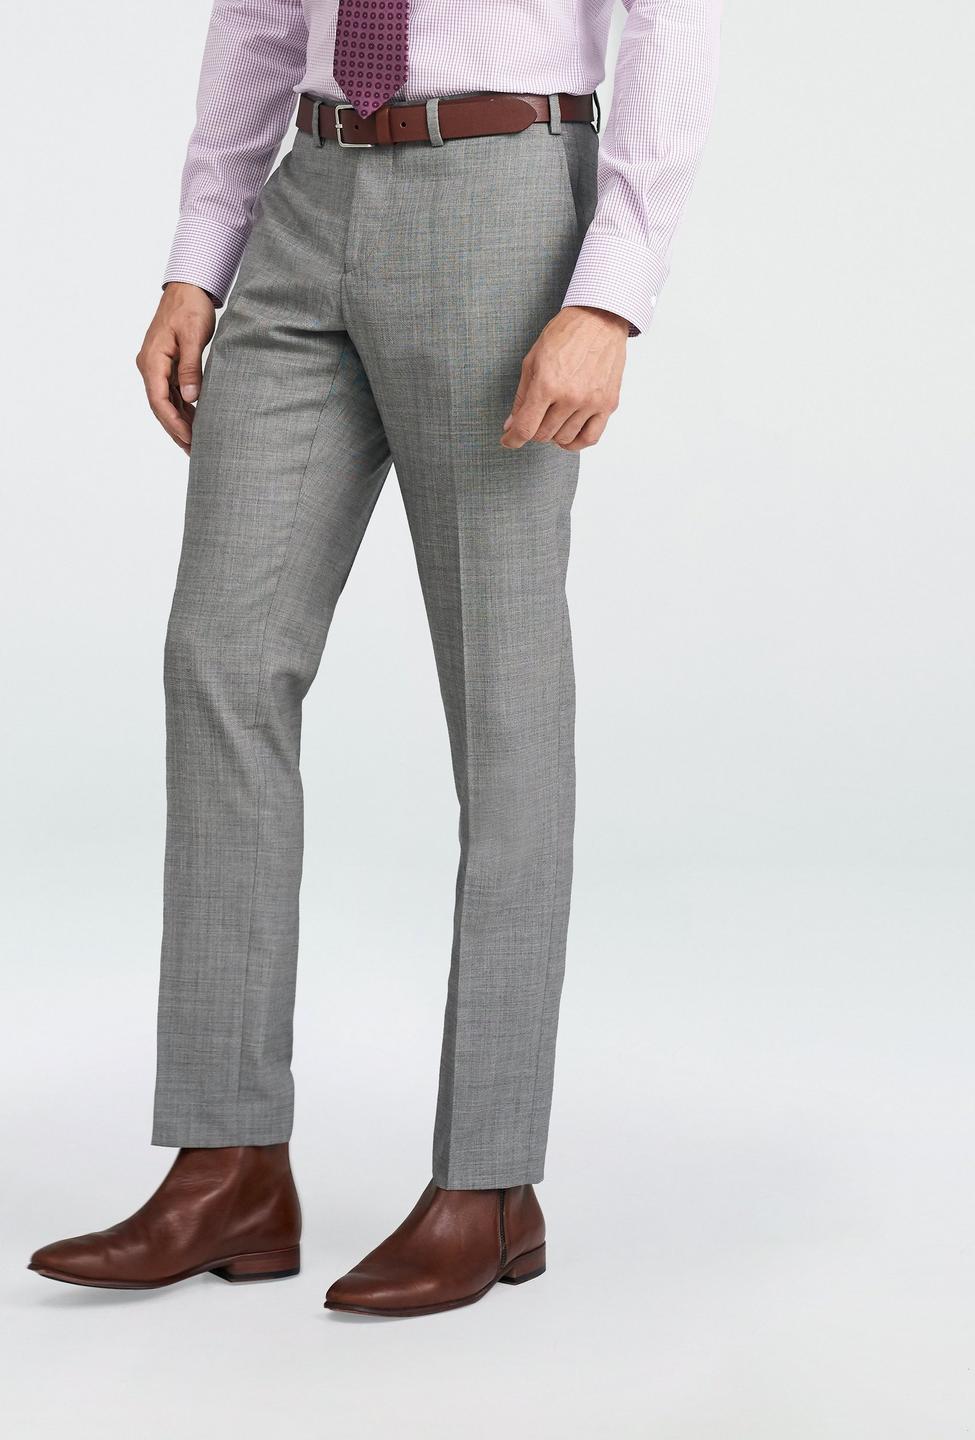 Gray pants - Hayle Solid Design from Premium Indochino Collection